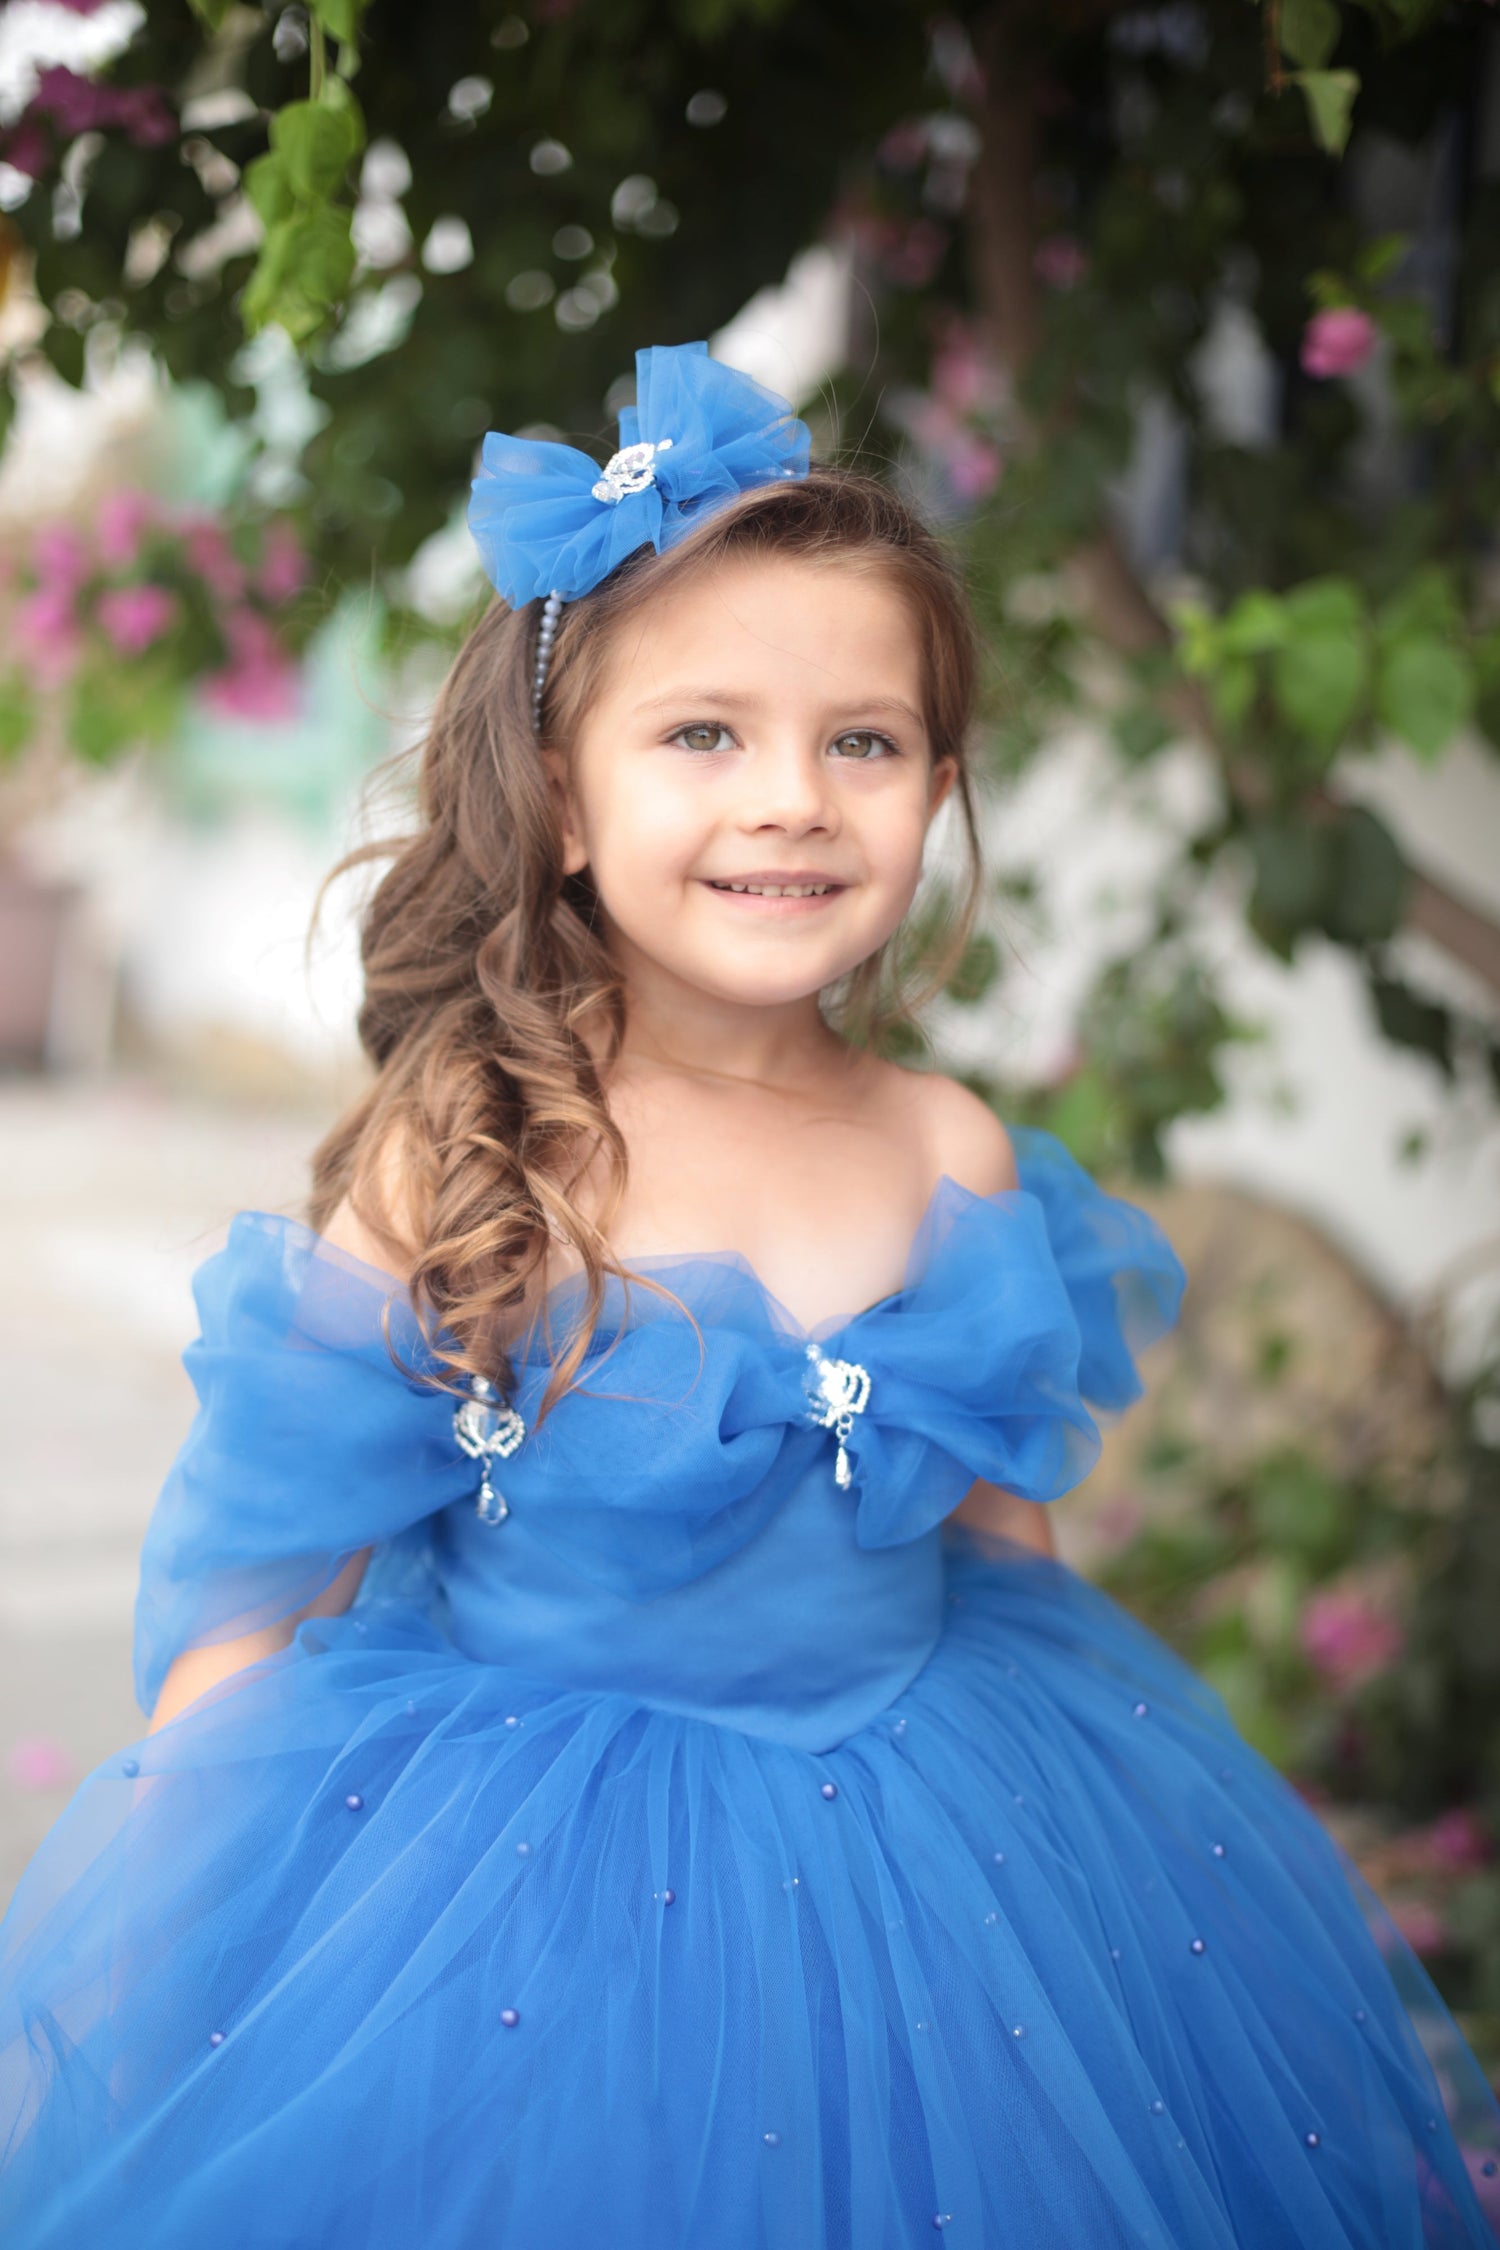 Royal Blue Lace Royal Blue Childrens Dress With 3D Applique And Tulle  Perfect For Weddings, Pageants, And First Communion 2022 Collection From  Sunnybridal01, $111.89 | DHgate.Com